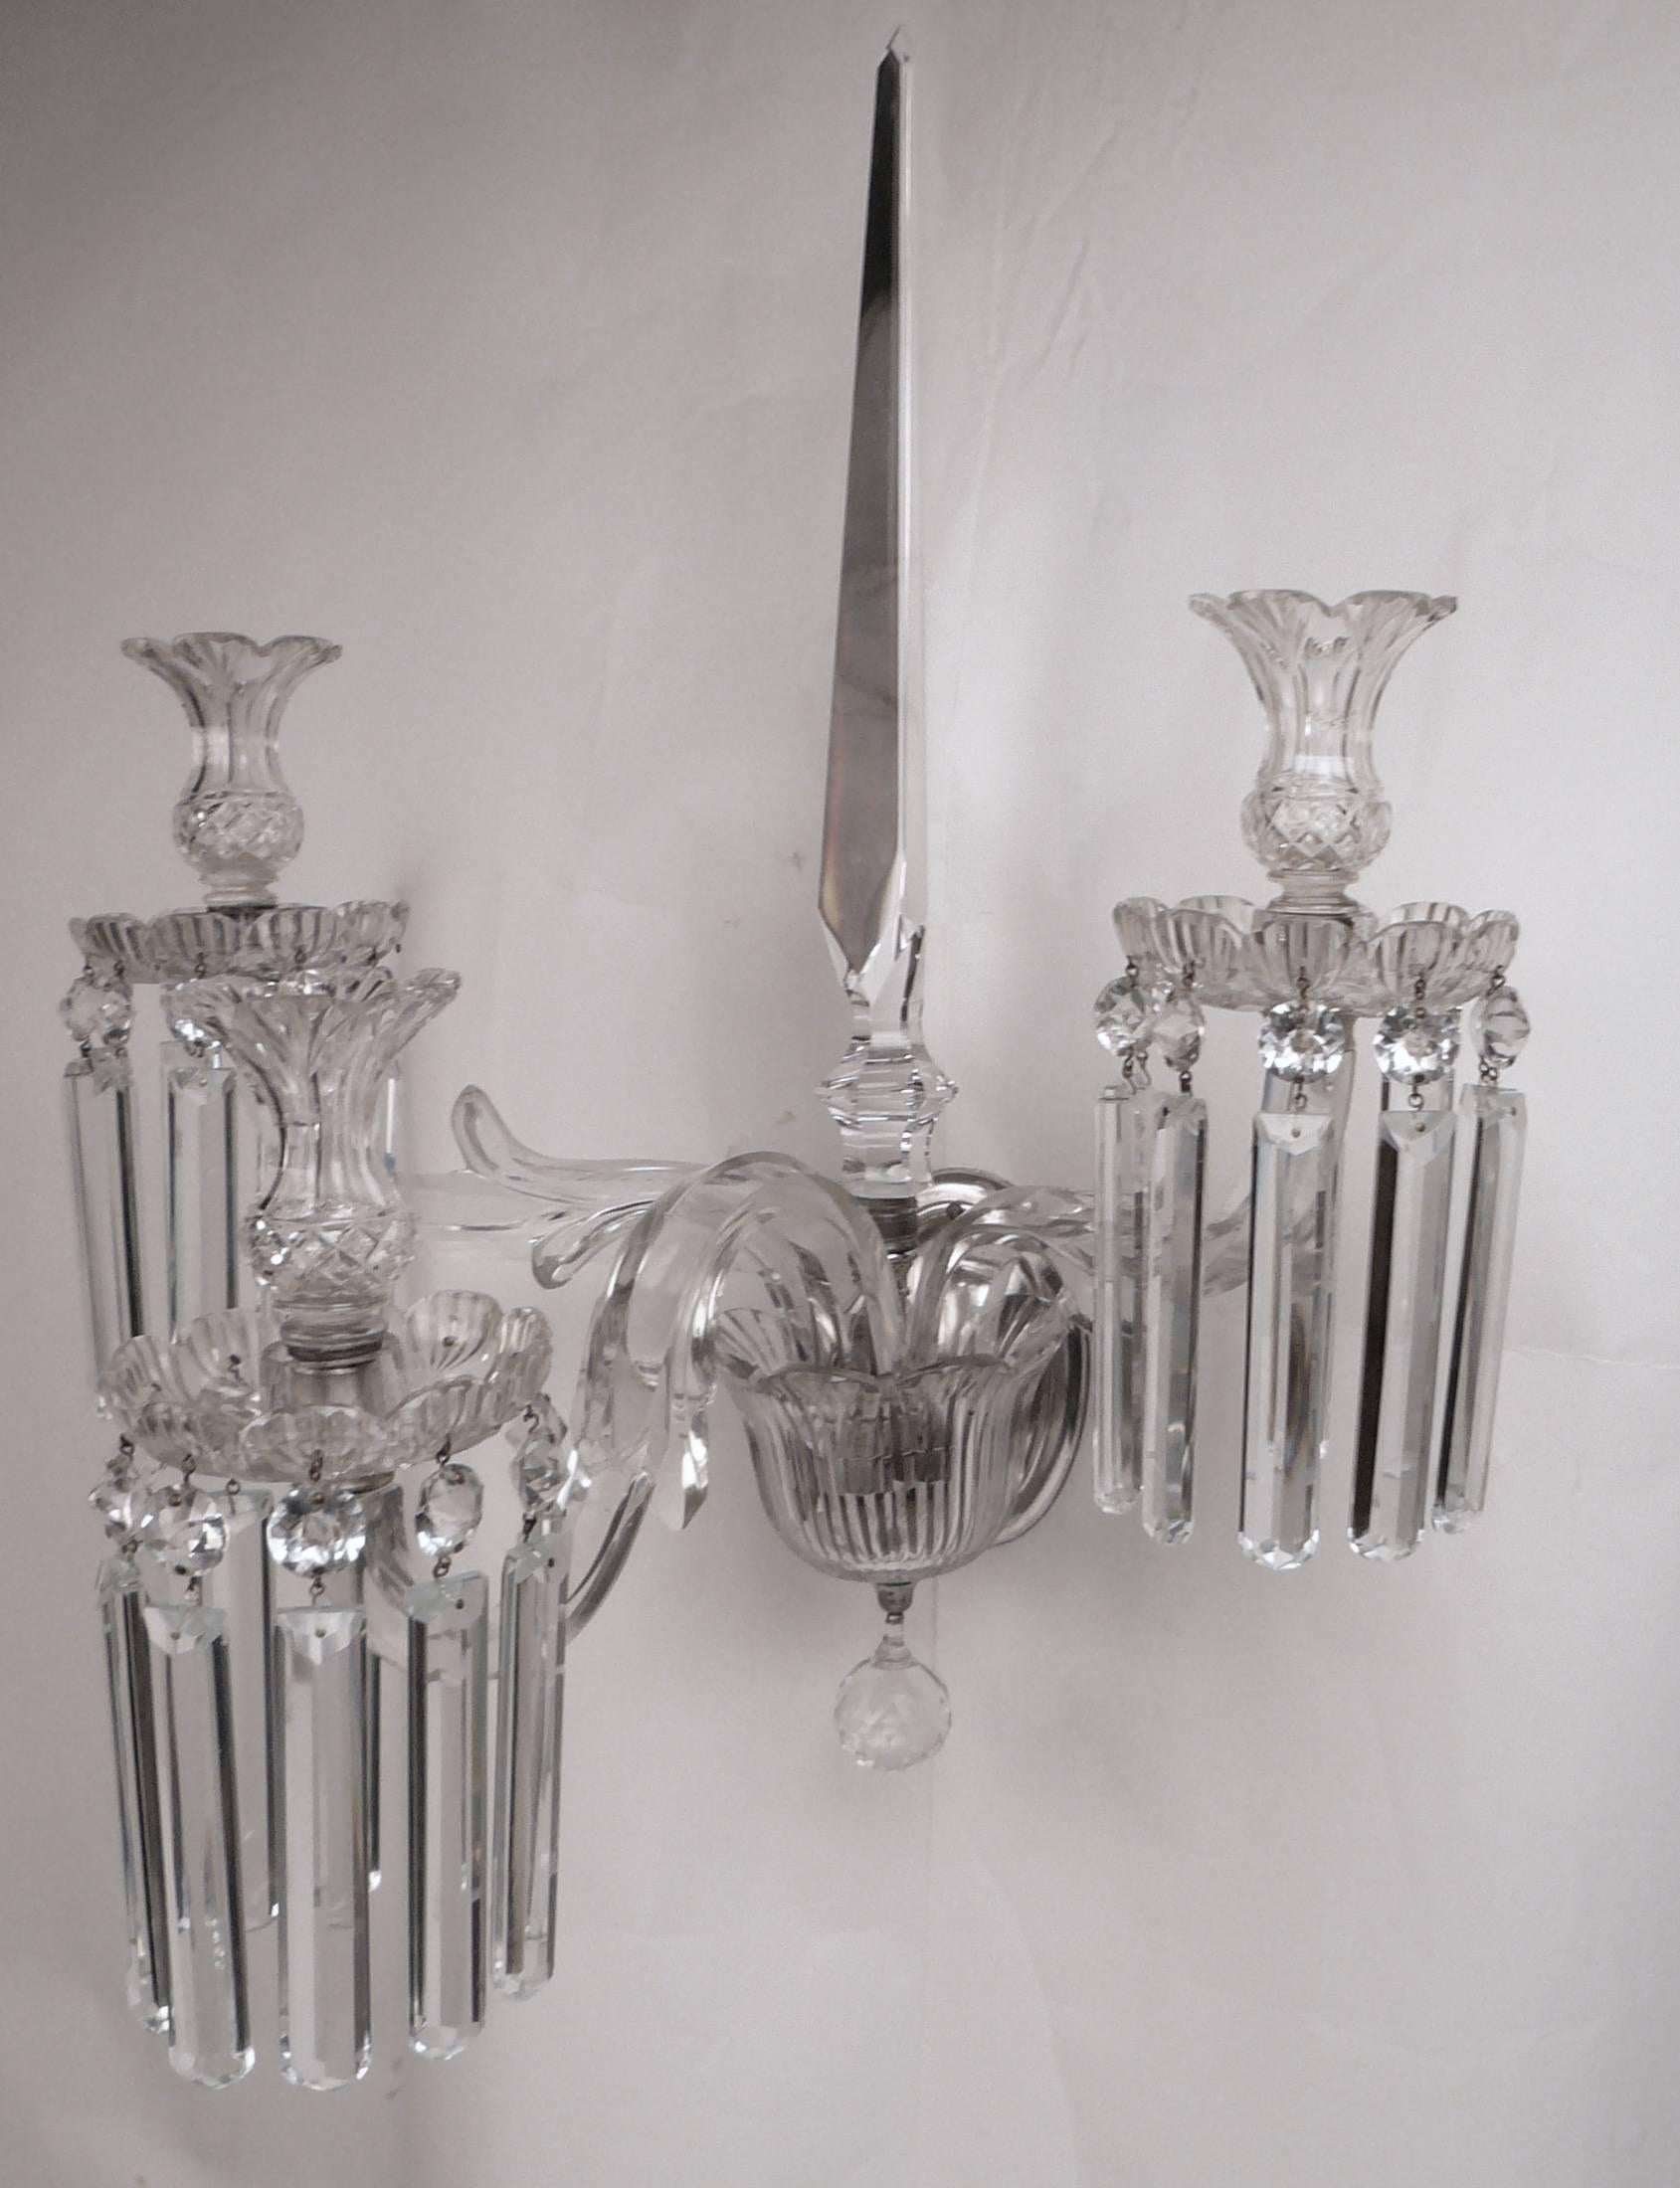 Large Scale 19th Century English Cut Crystal Single Sconce 4